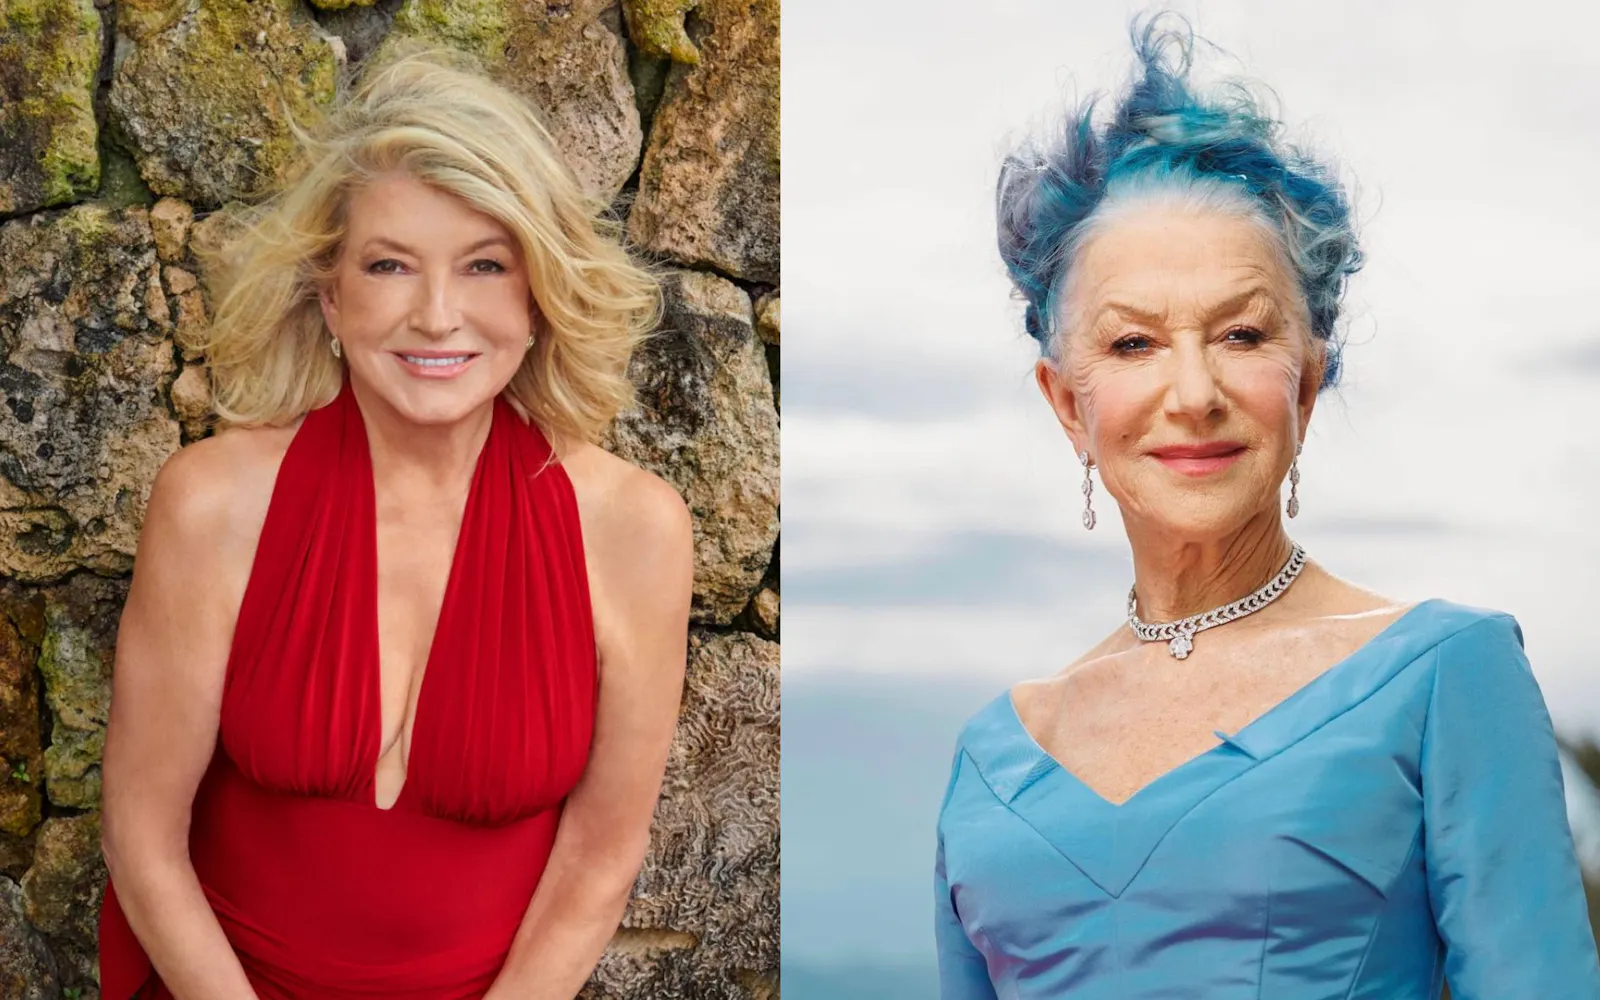 martha stewart in sports illustrated swimsuit issue alongside Helen Mirren at Cannes film festival with blue hair